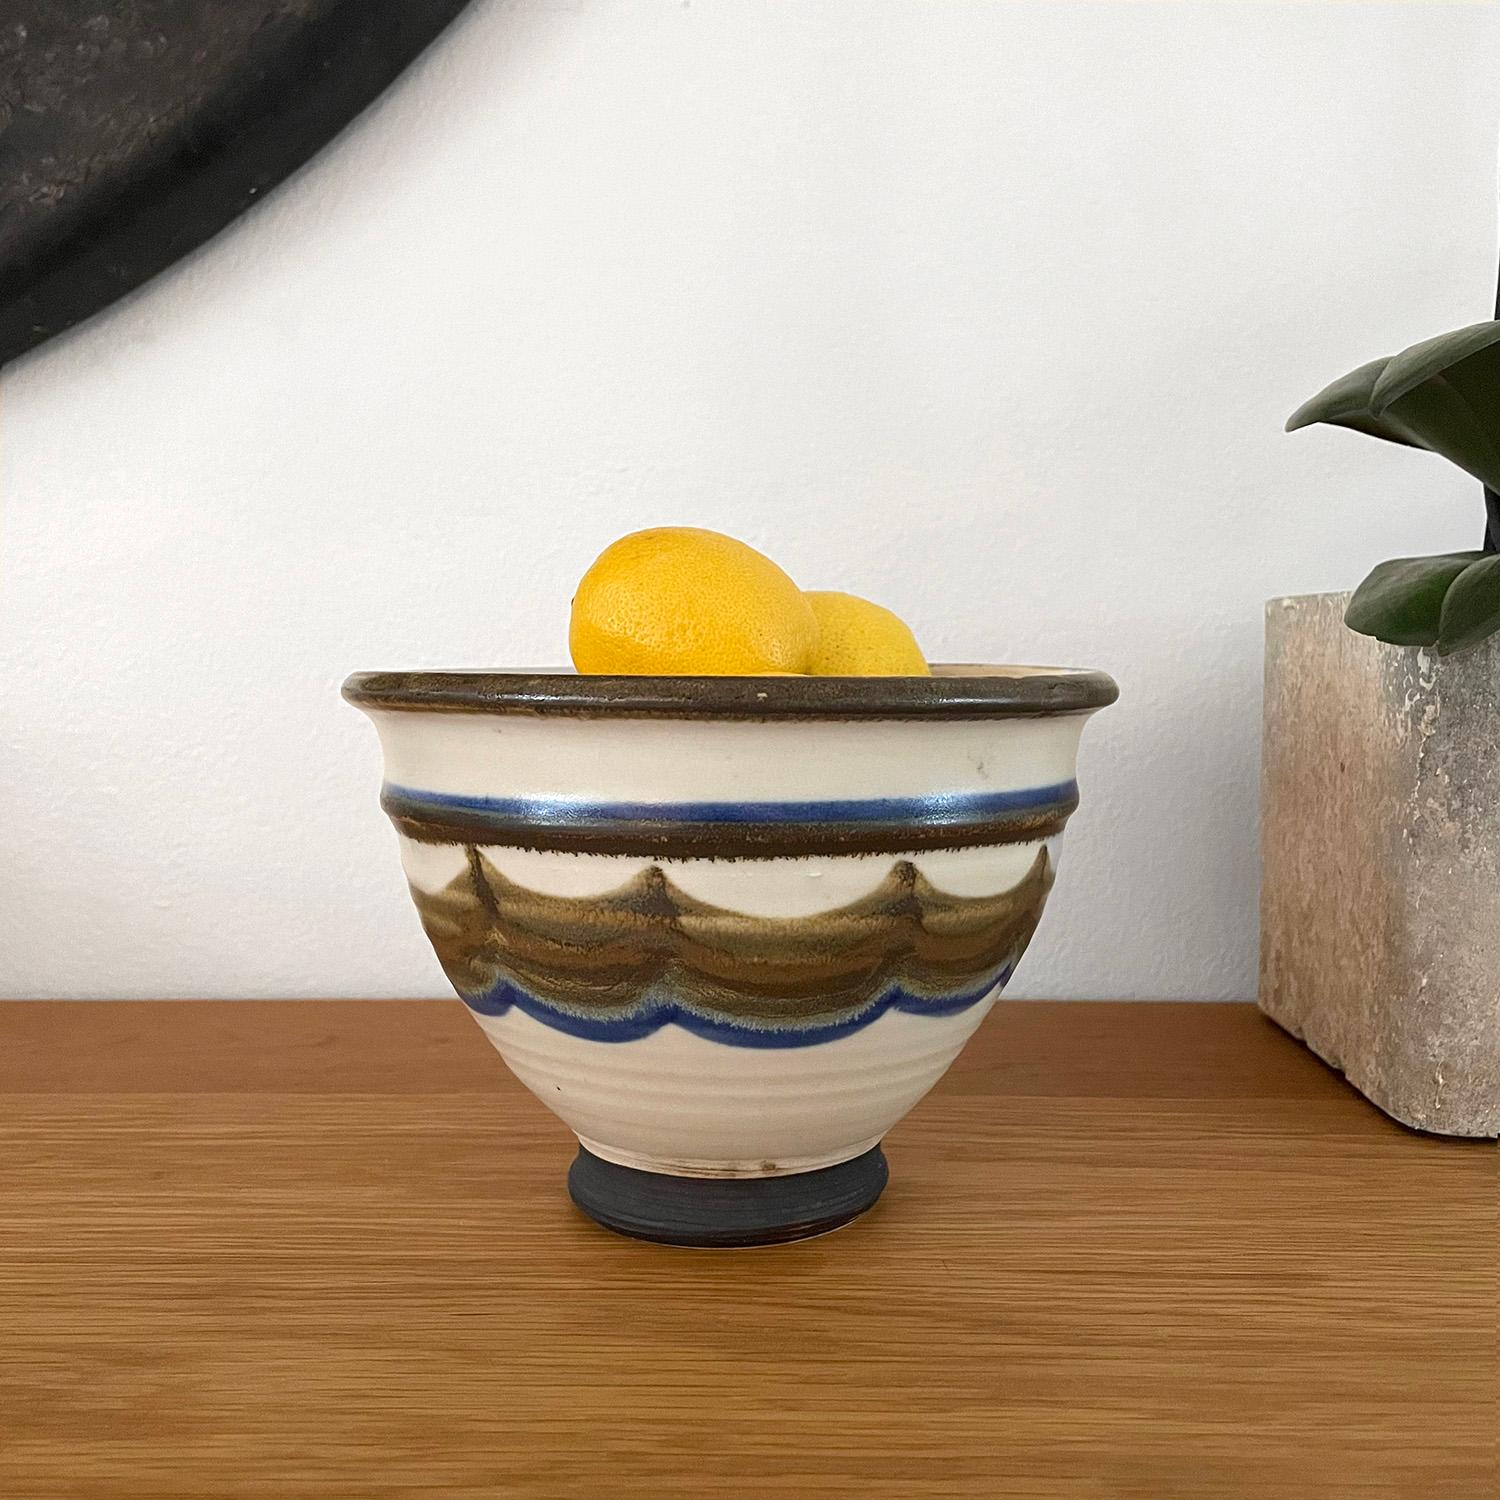 Arts & Crafts ceramic footed bowl
Organic composition and feel
Neutral toned palette
Multi layered wave pattern design accented in deep blue, avocado and browns
Satin glazed finish with the exception of the nuanced footed base
A subtly detailed dark